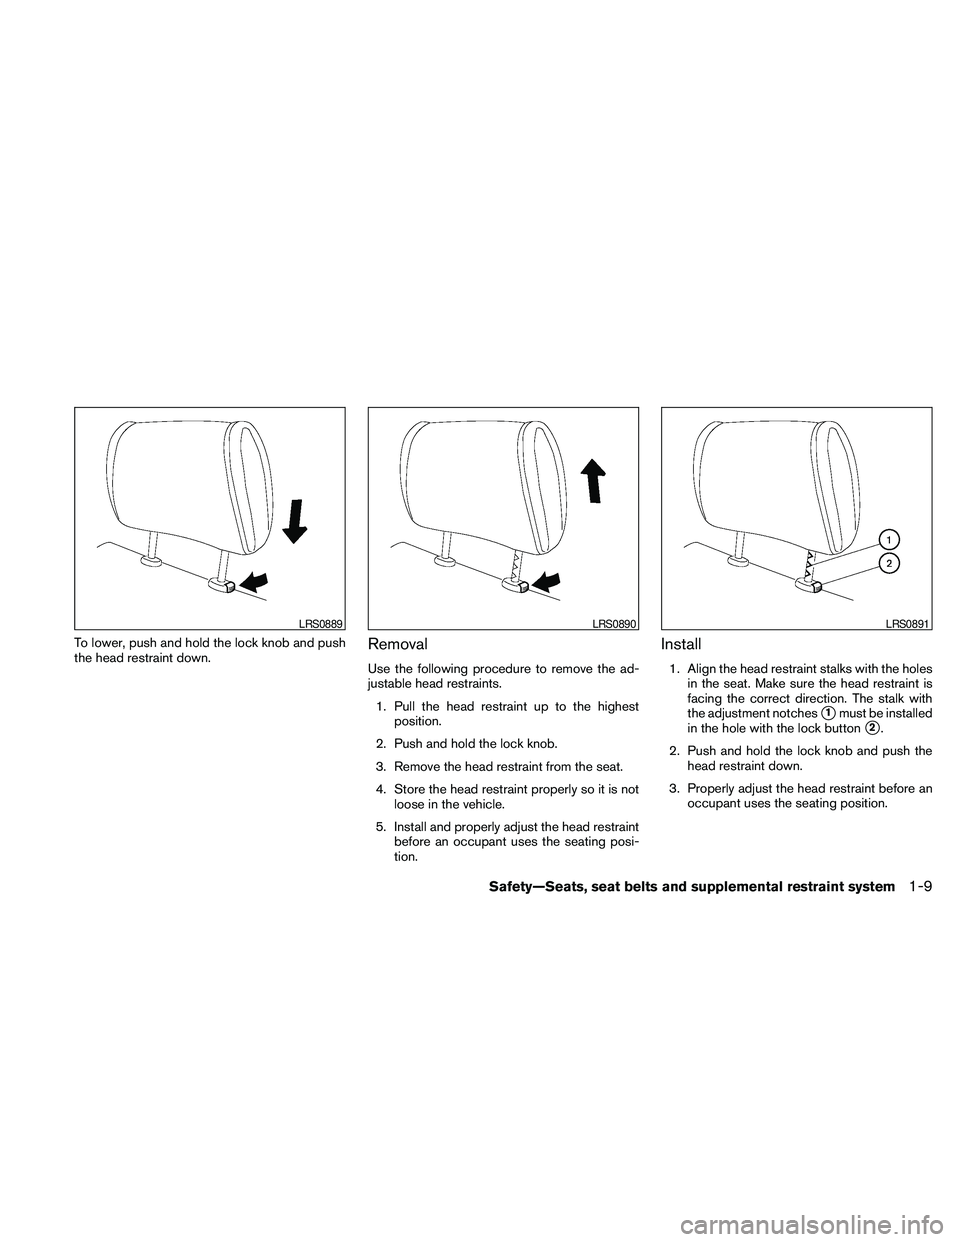 NISSAN MAXIMA 2010  Owner´s Manual To lower, push and hold the lock knob and push
the head restraint down.Removal
Use the following procedure to remove the ad-
justable head restraints.
1. Pull the head restraint up to the highest
posi